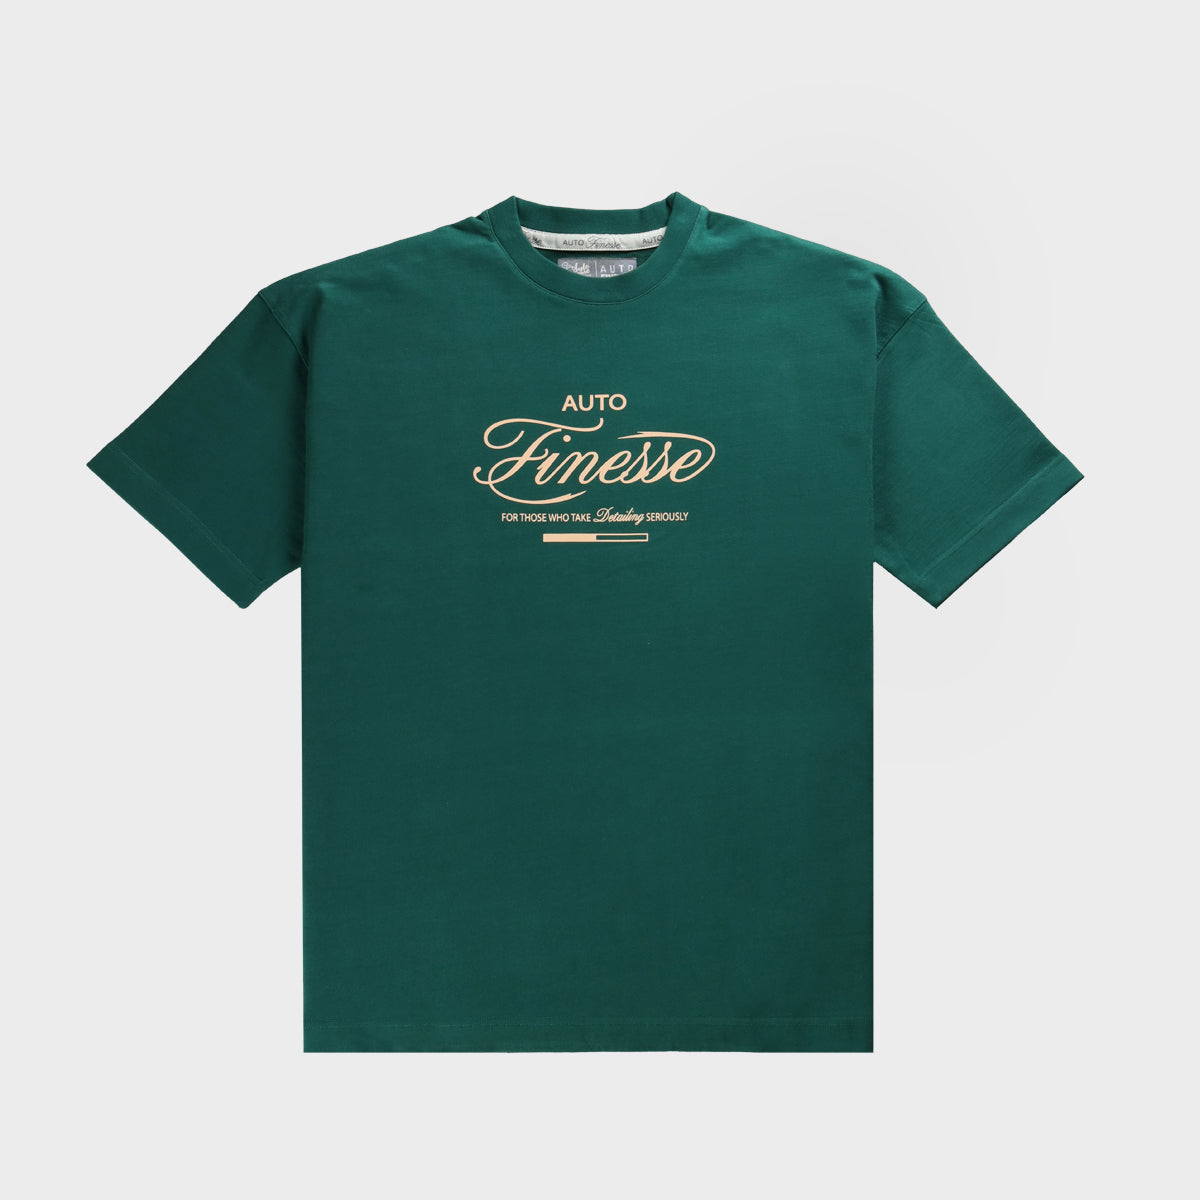 Auto Finesse | Car Detailing Products | Serious Detailers T-Shirt